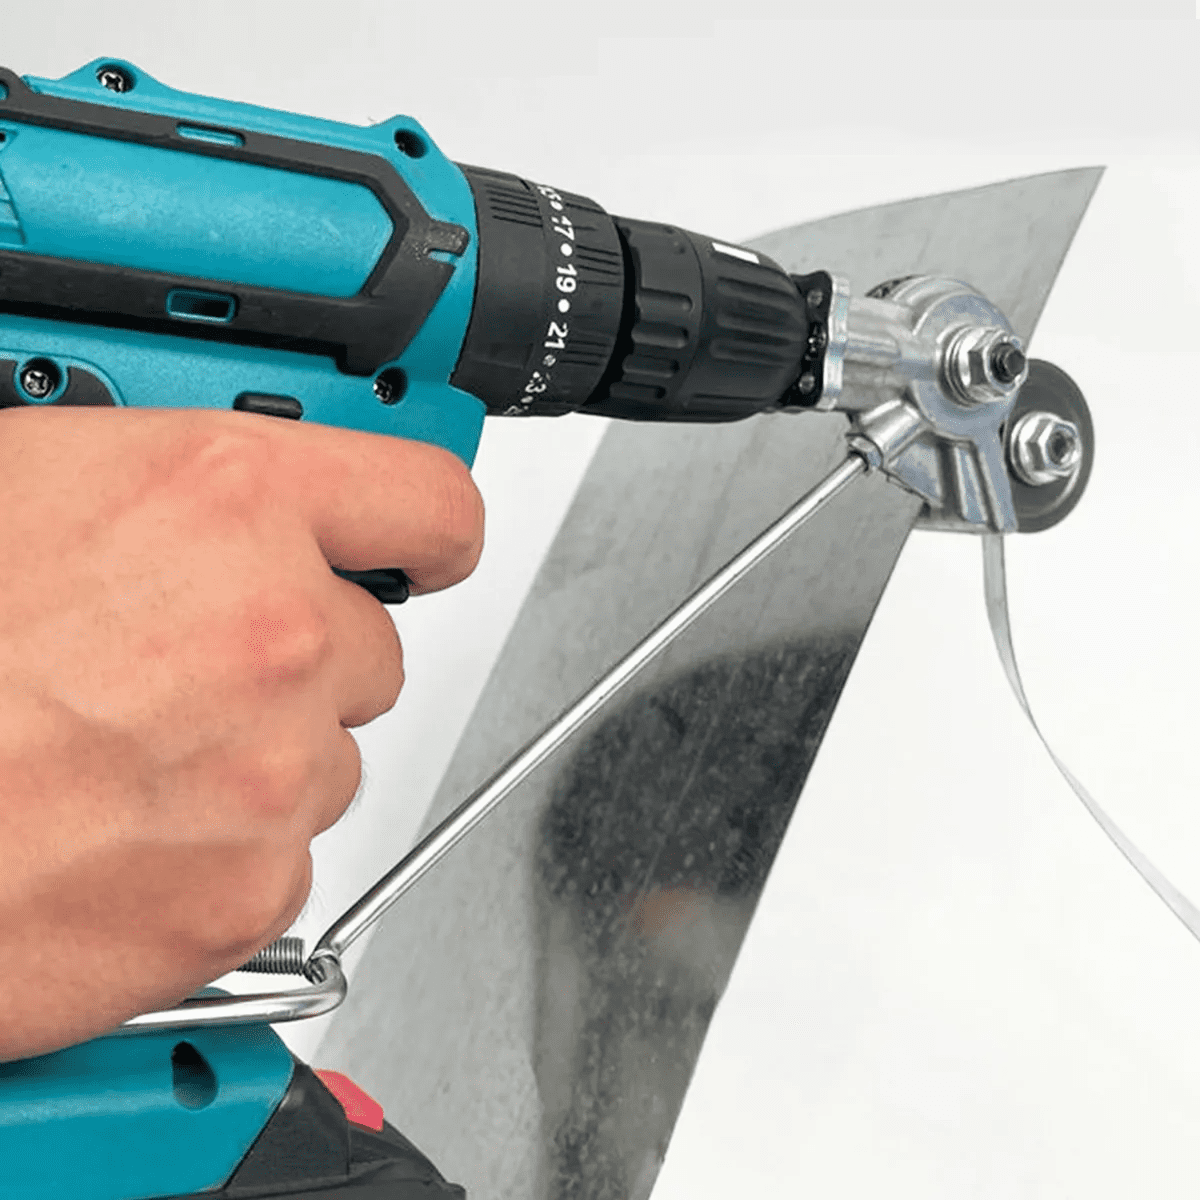 Plate Drill Cutter | Fast &amp; Efficient | For plates up to 0.8mm. - WOWGOOD